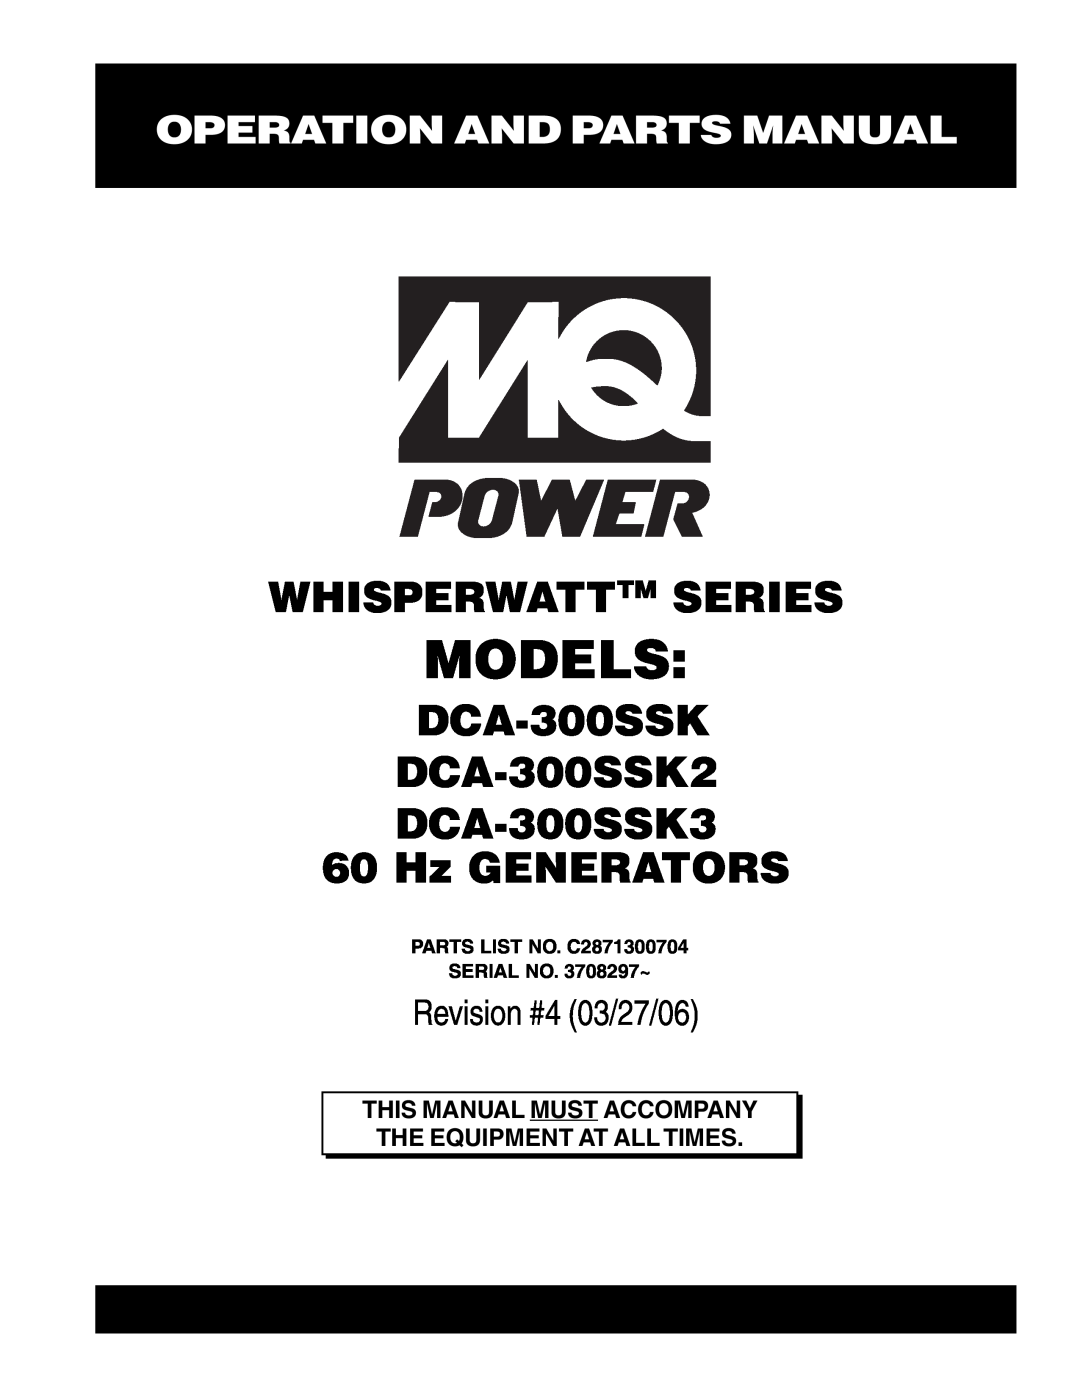 Multiquip DCA-300SSK manual Models, Operation And Parts Manual, Whisperwatttm Series, Revision #4 03/27/06 